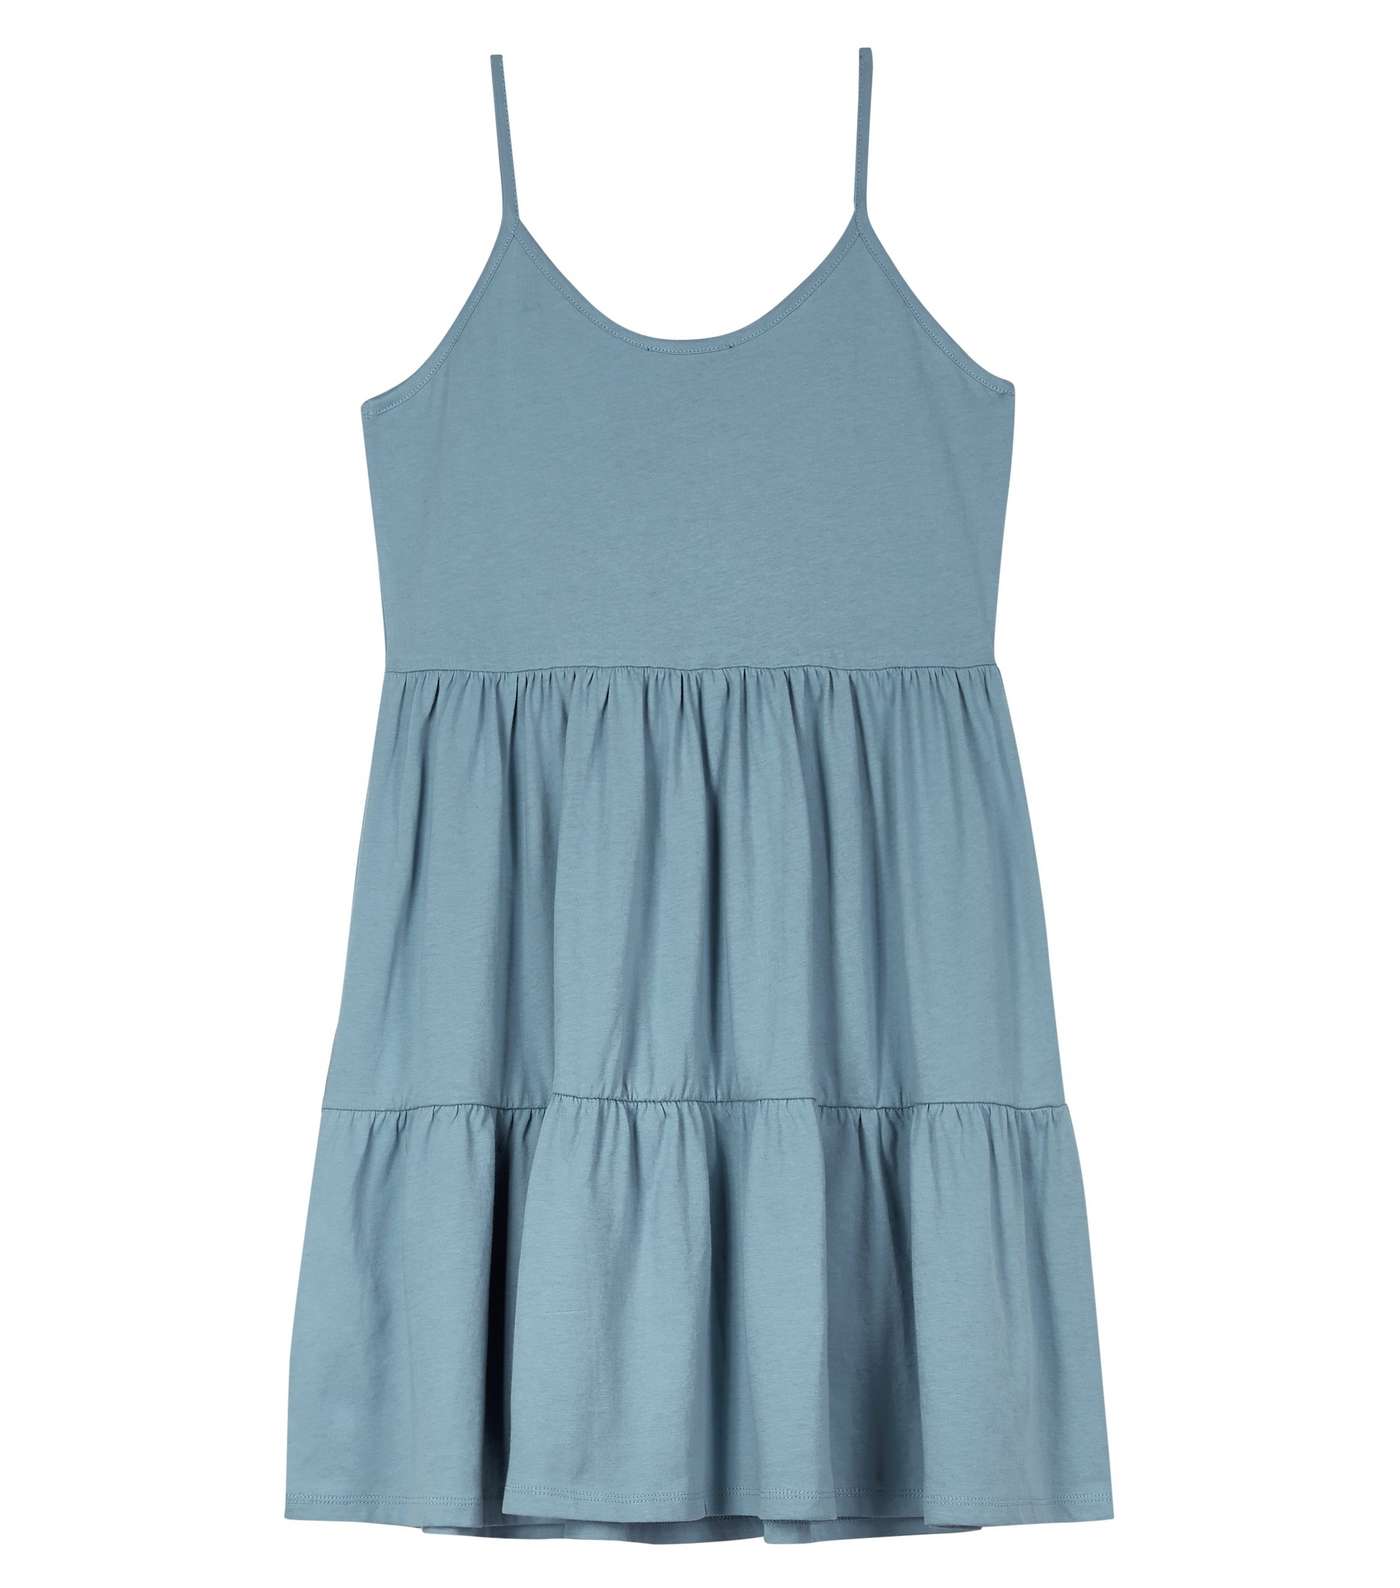 Girls Pale Blue Cotton Tiered Dress Image 2